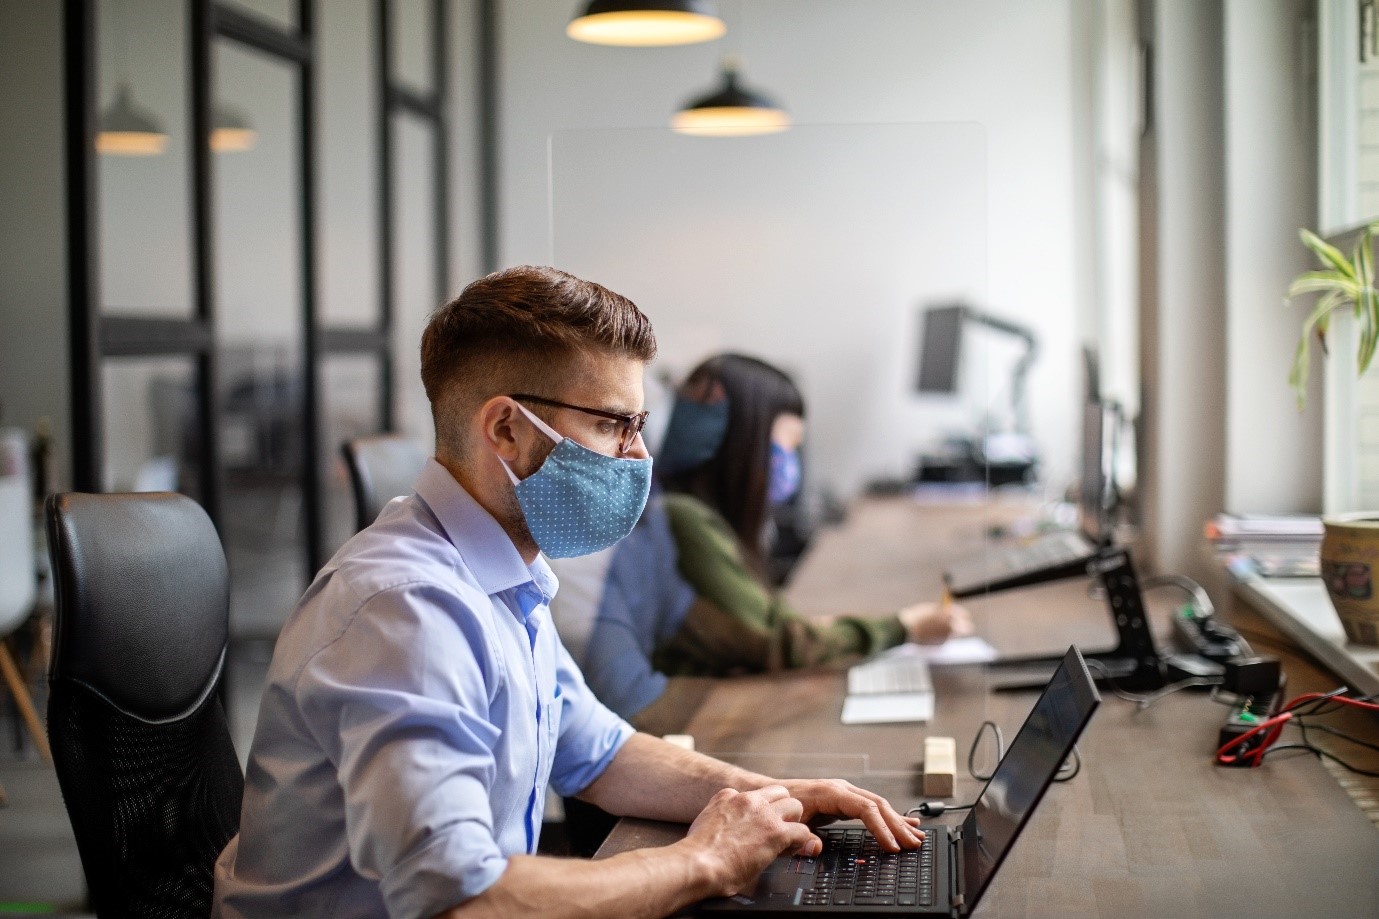 People wearing masks while working